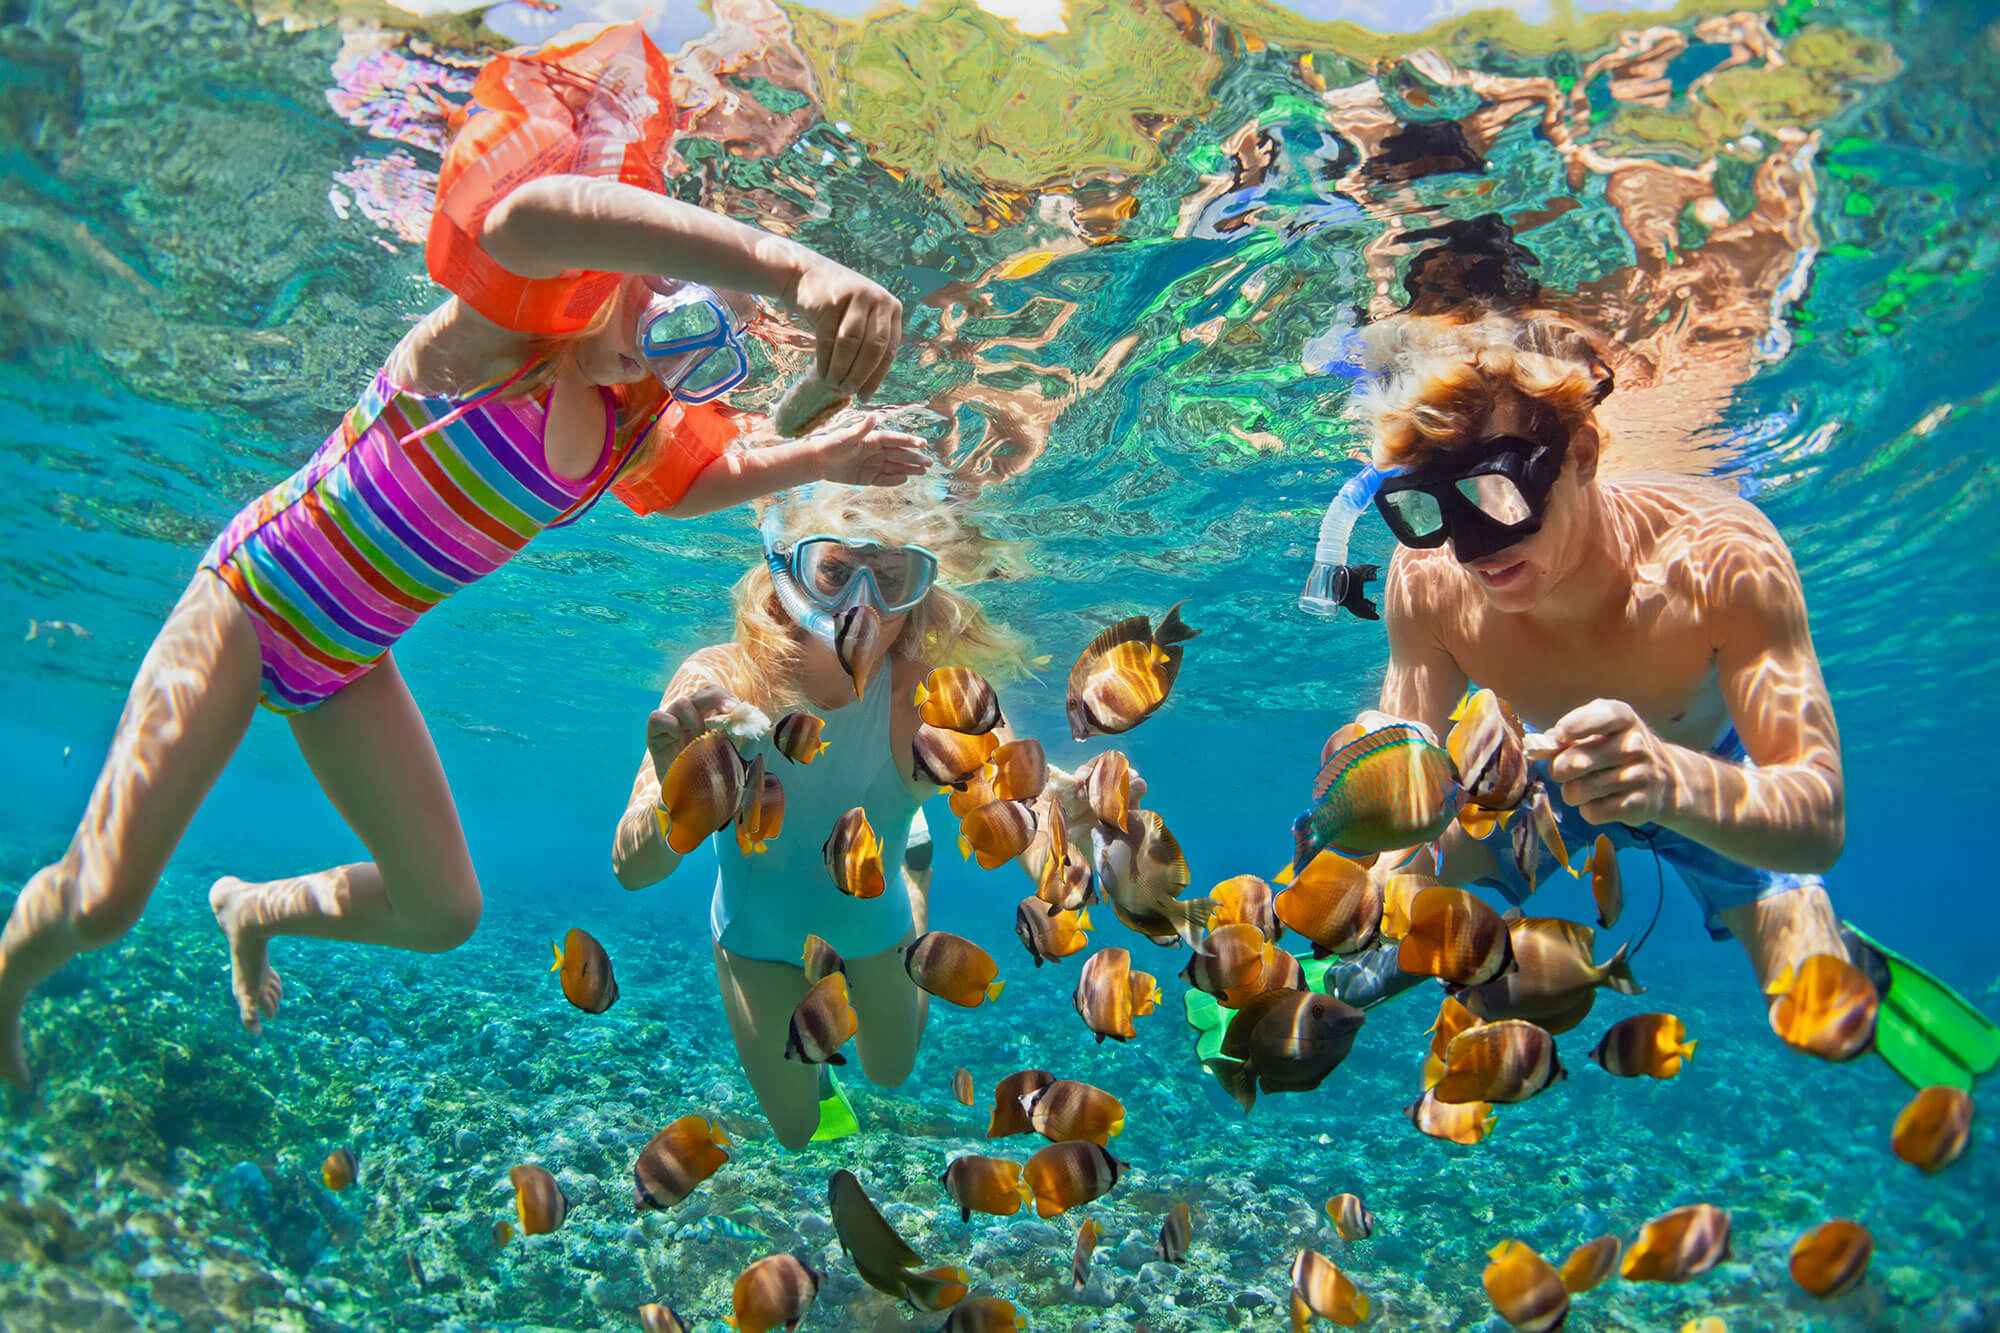 A picture perfect tropical island with crystal-clear turquoise waters lapping golden beaches, Mauritius ticks all the boxes for a beach and watersports holiday. The snorkelling is fantastic, but to really appreciate life beneath the shimmering ocean surface, you need to scuba dive.